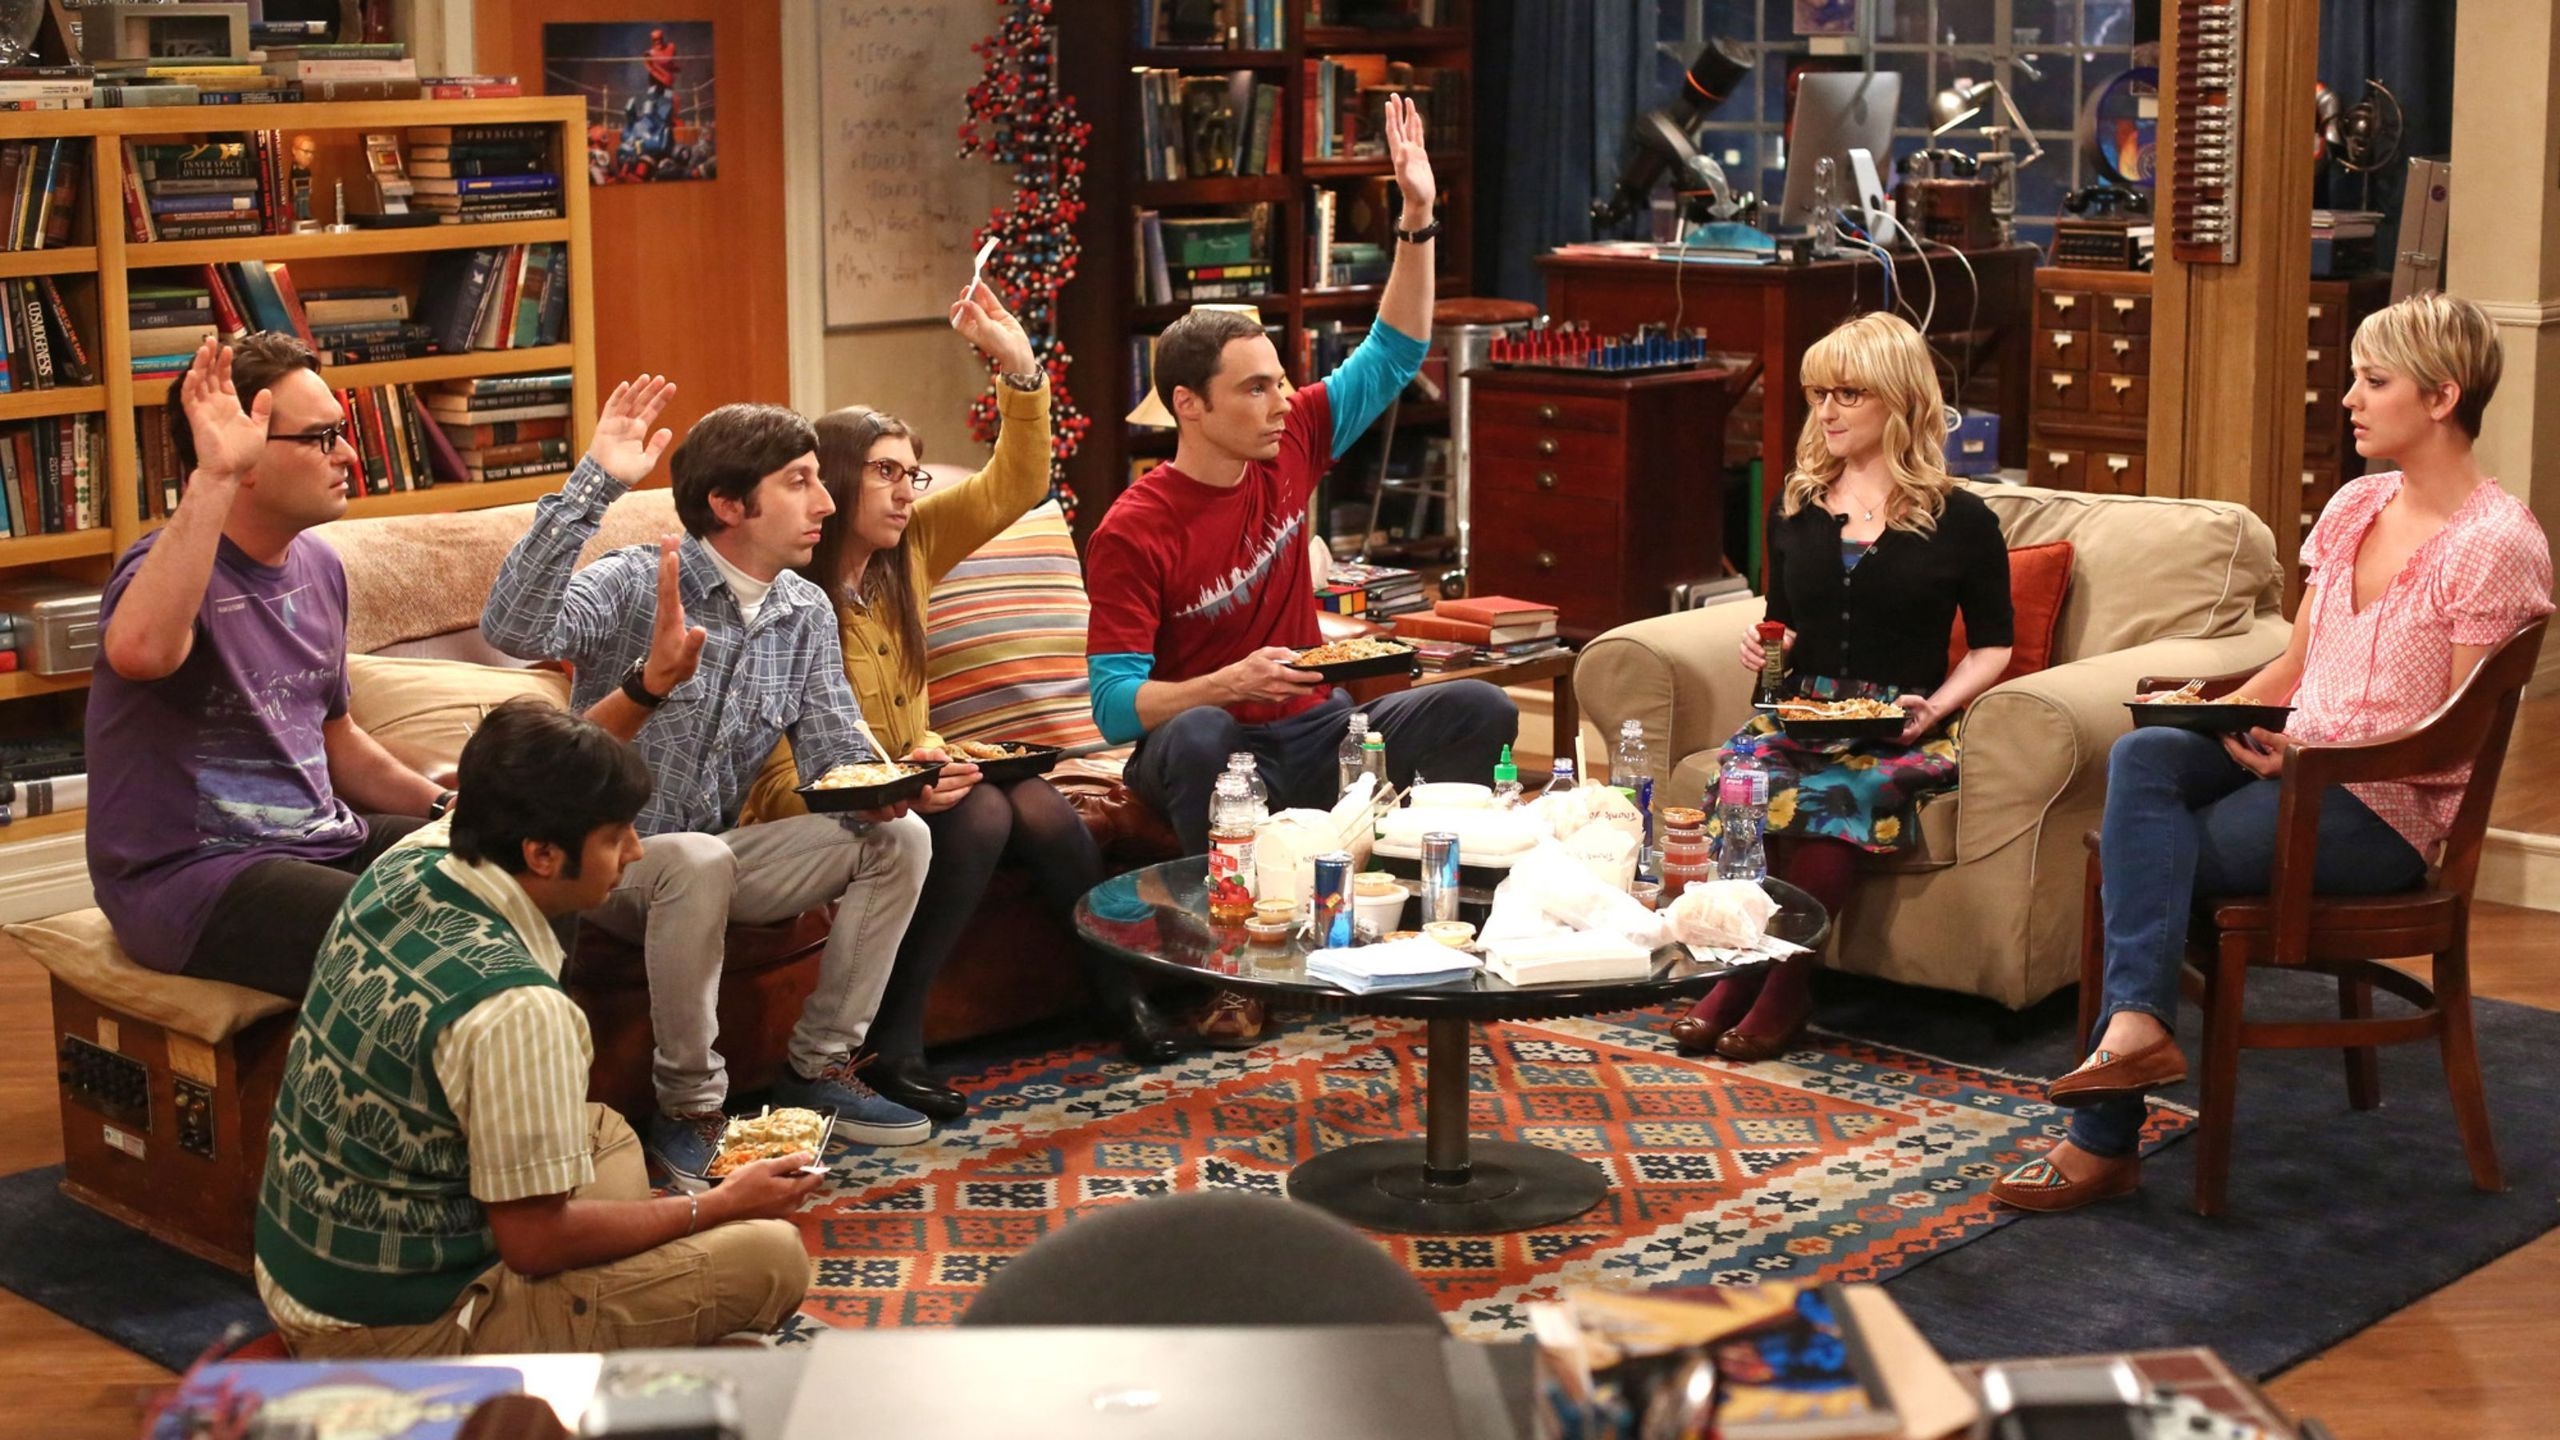 The Big Bang Theory Scene for 2560x1440 HDTV resolution